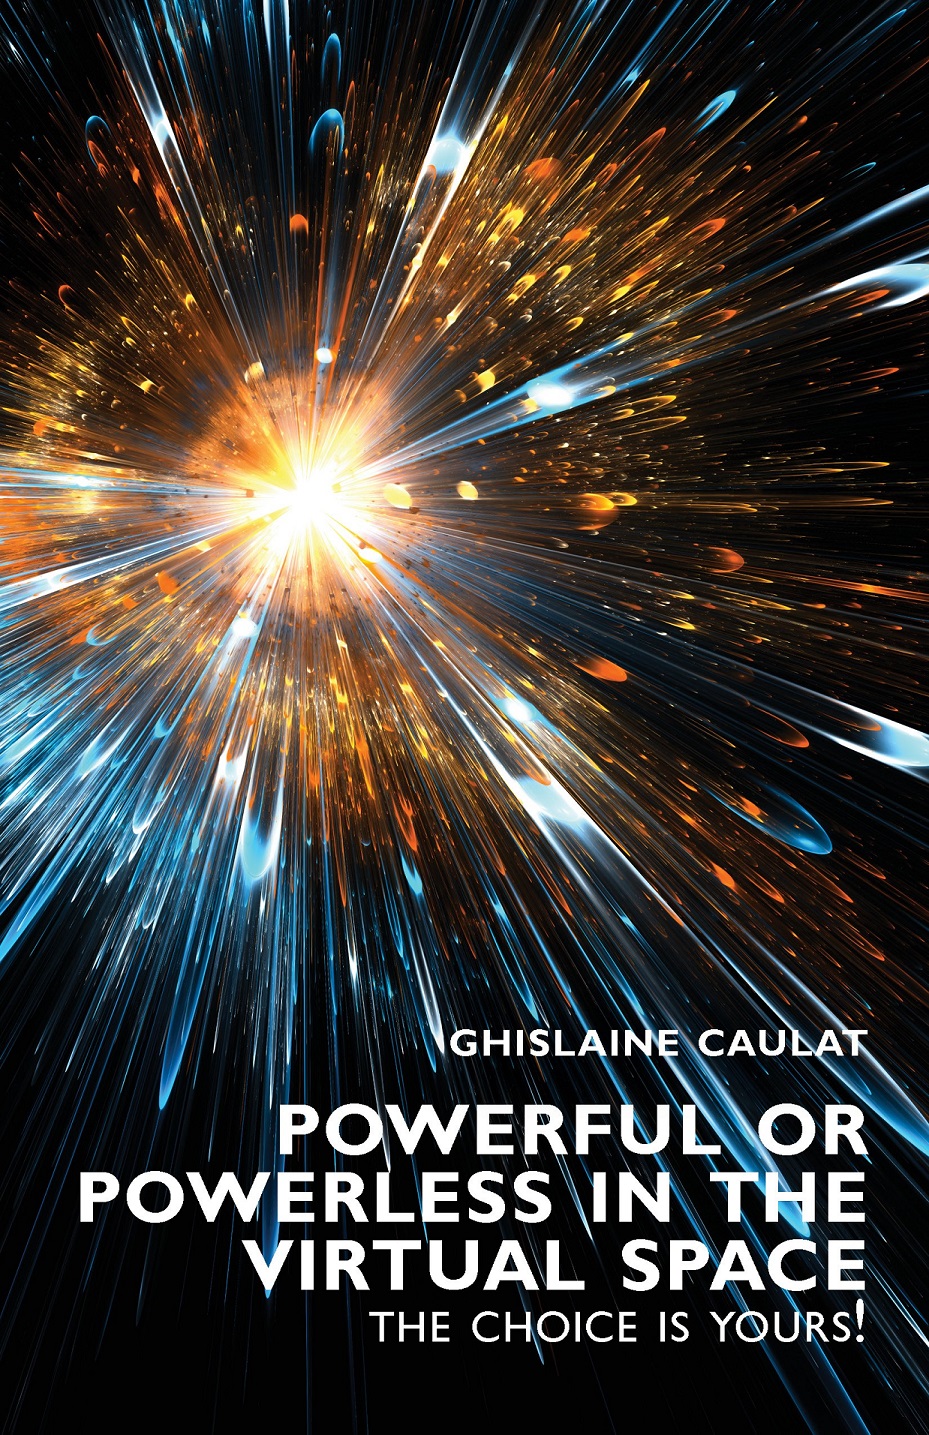 Powerful or powerless in the virtual space